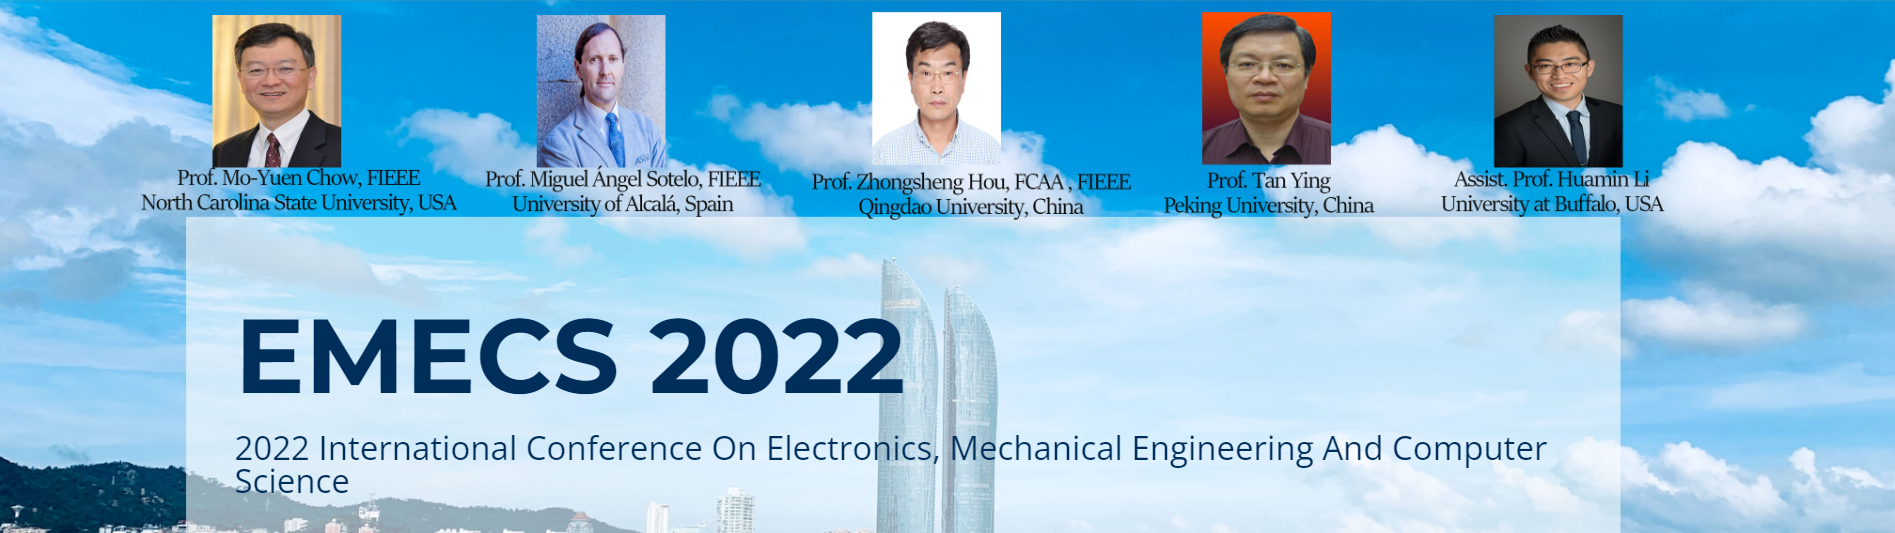 2022 International Conference on Electronics, Mechanical Engineering and Computer Science (EMECS 2022)-EI Compendex, Xiamen, Fujian, China